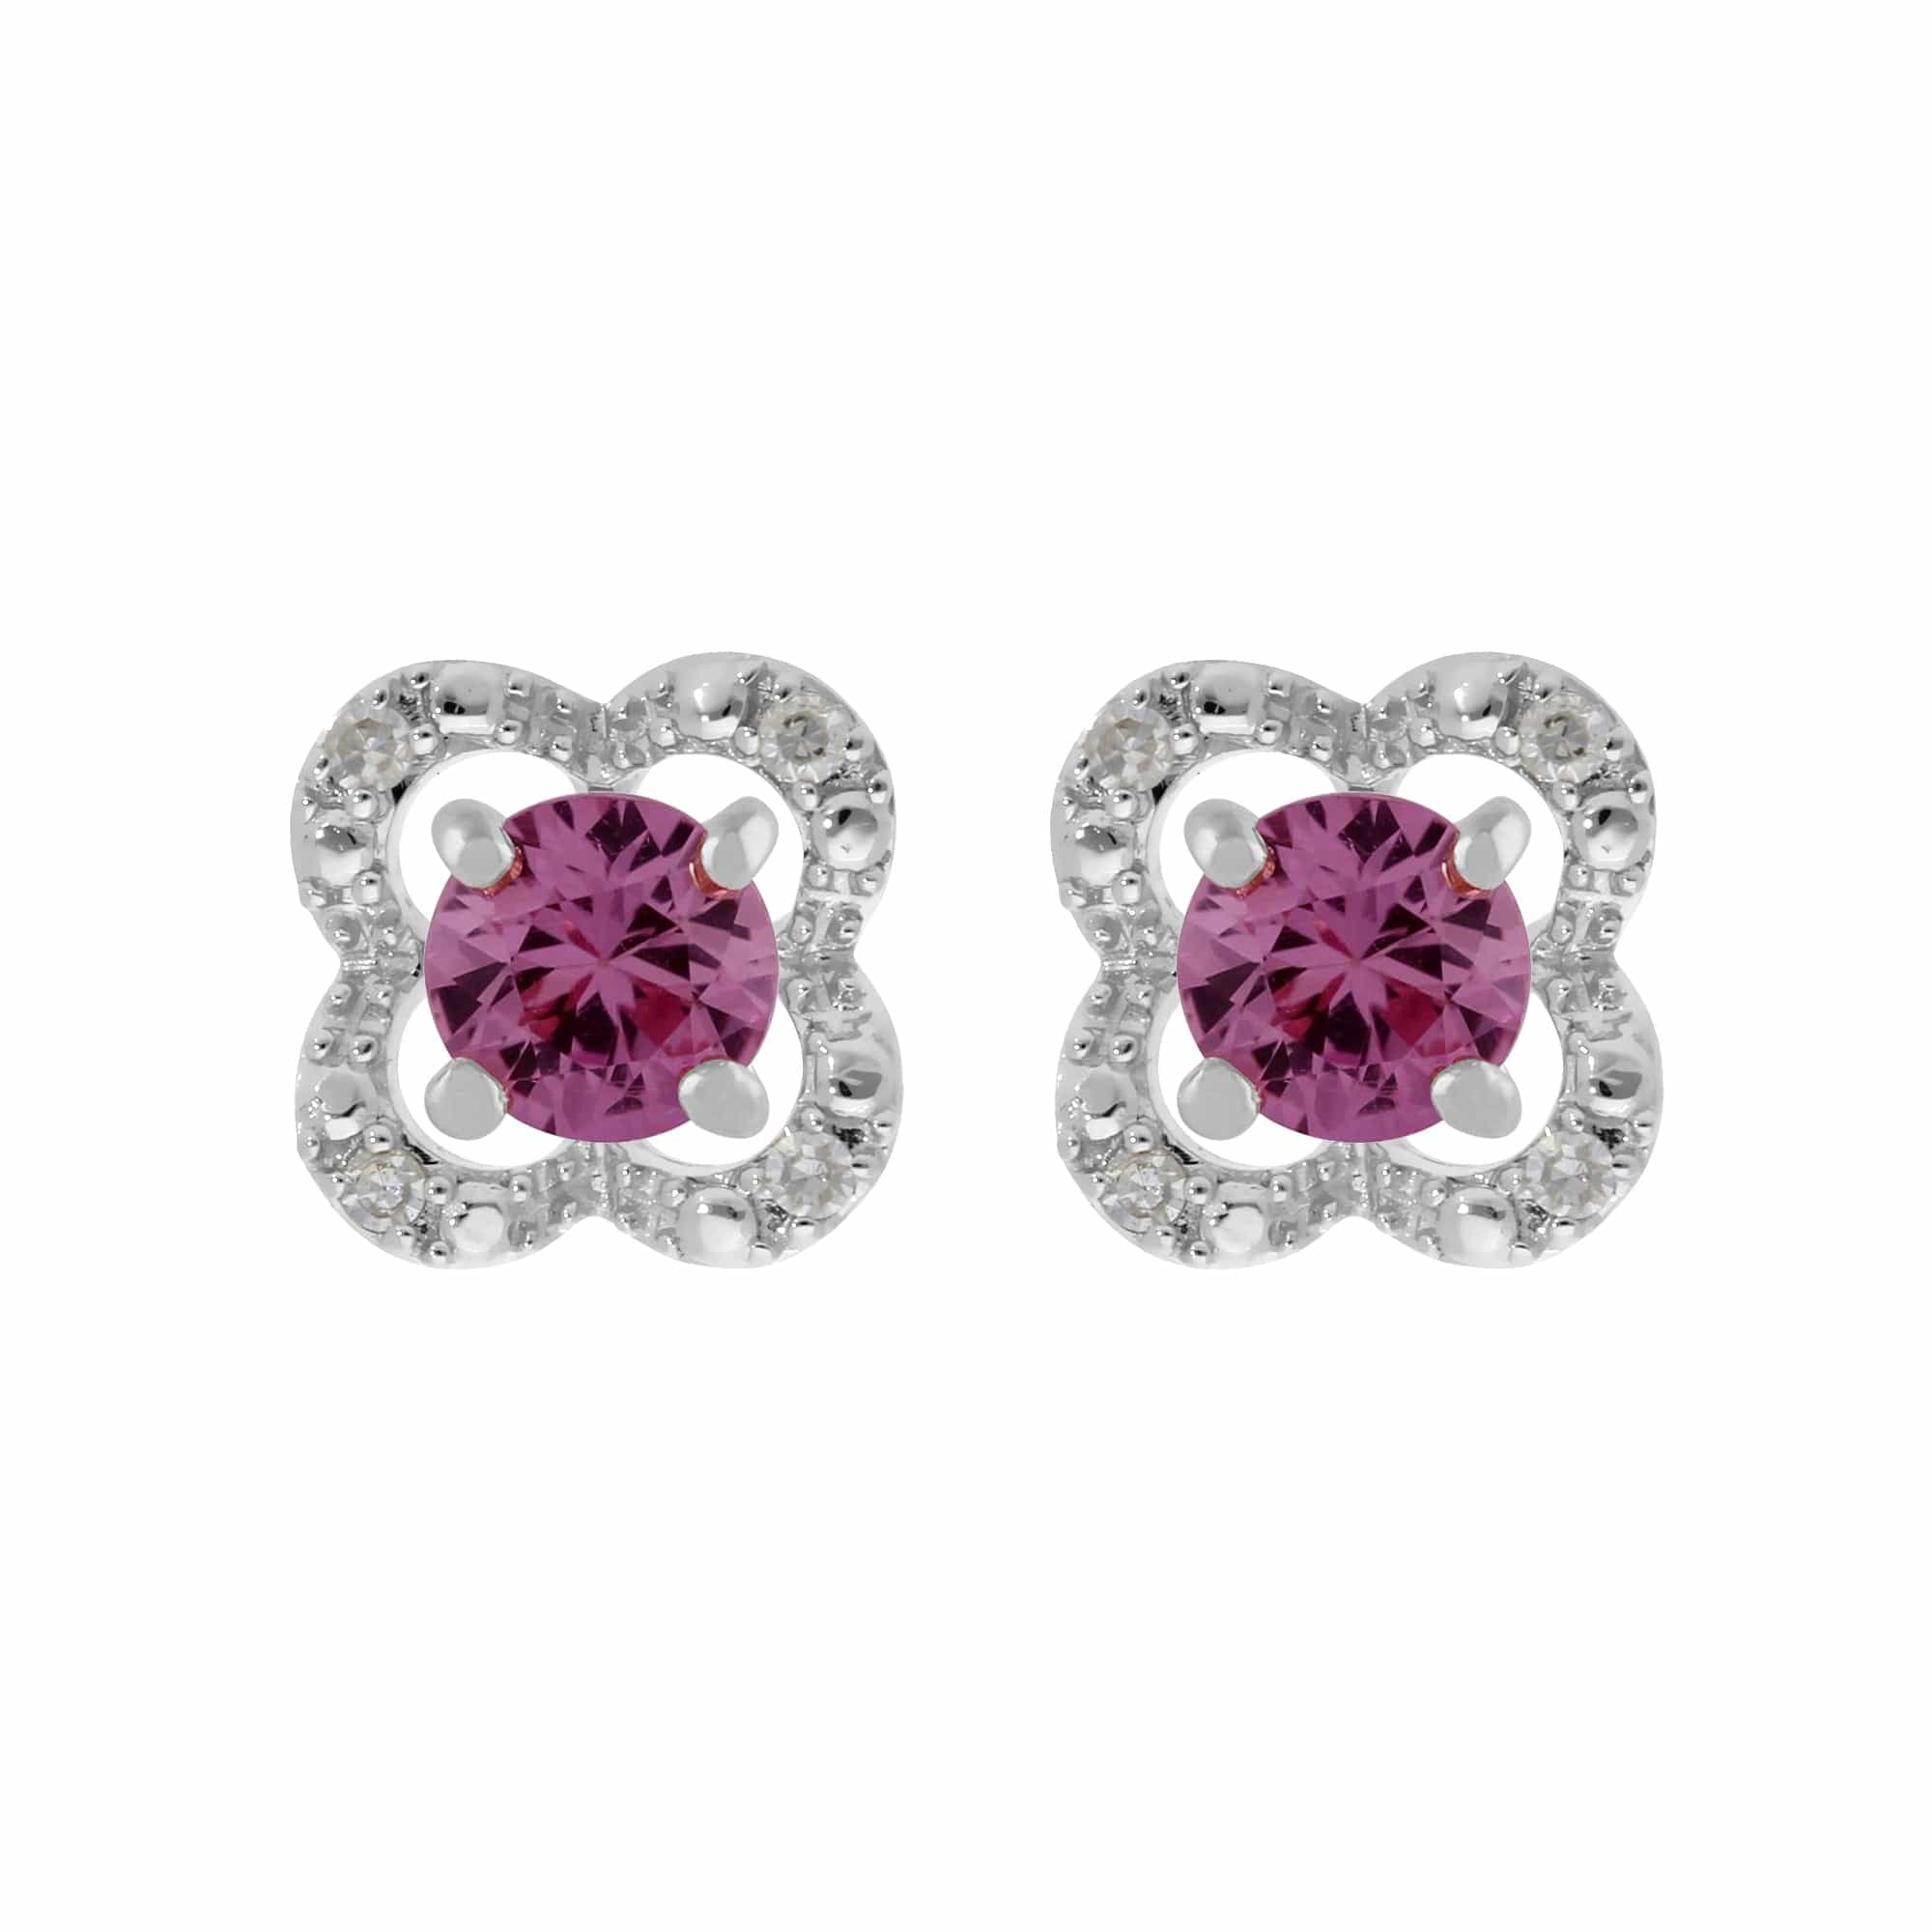 117E0031159-162E0244019 Classic Round Pink Sapphire Studs with Detachable Diamond Flower Ear Jacket in 9ct White Gold 1